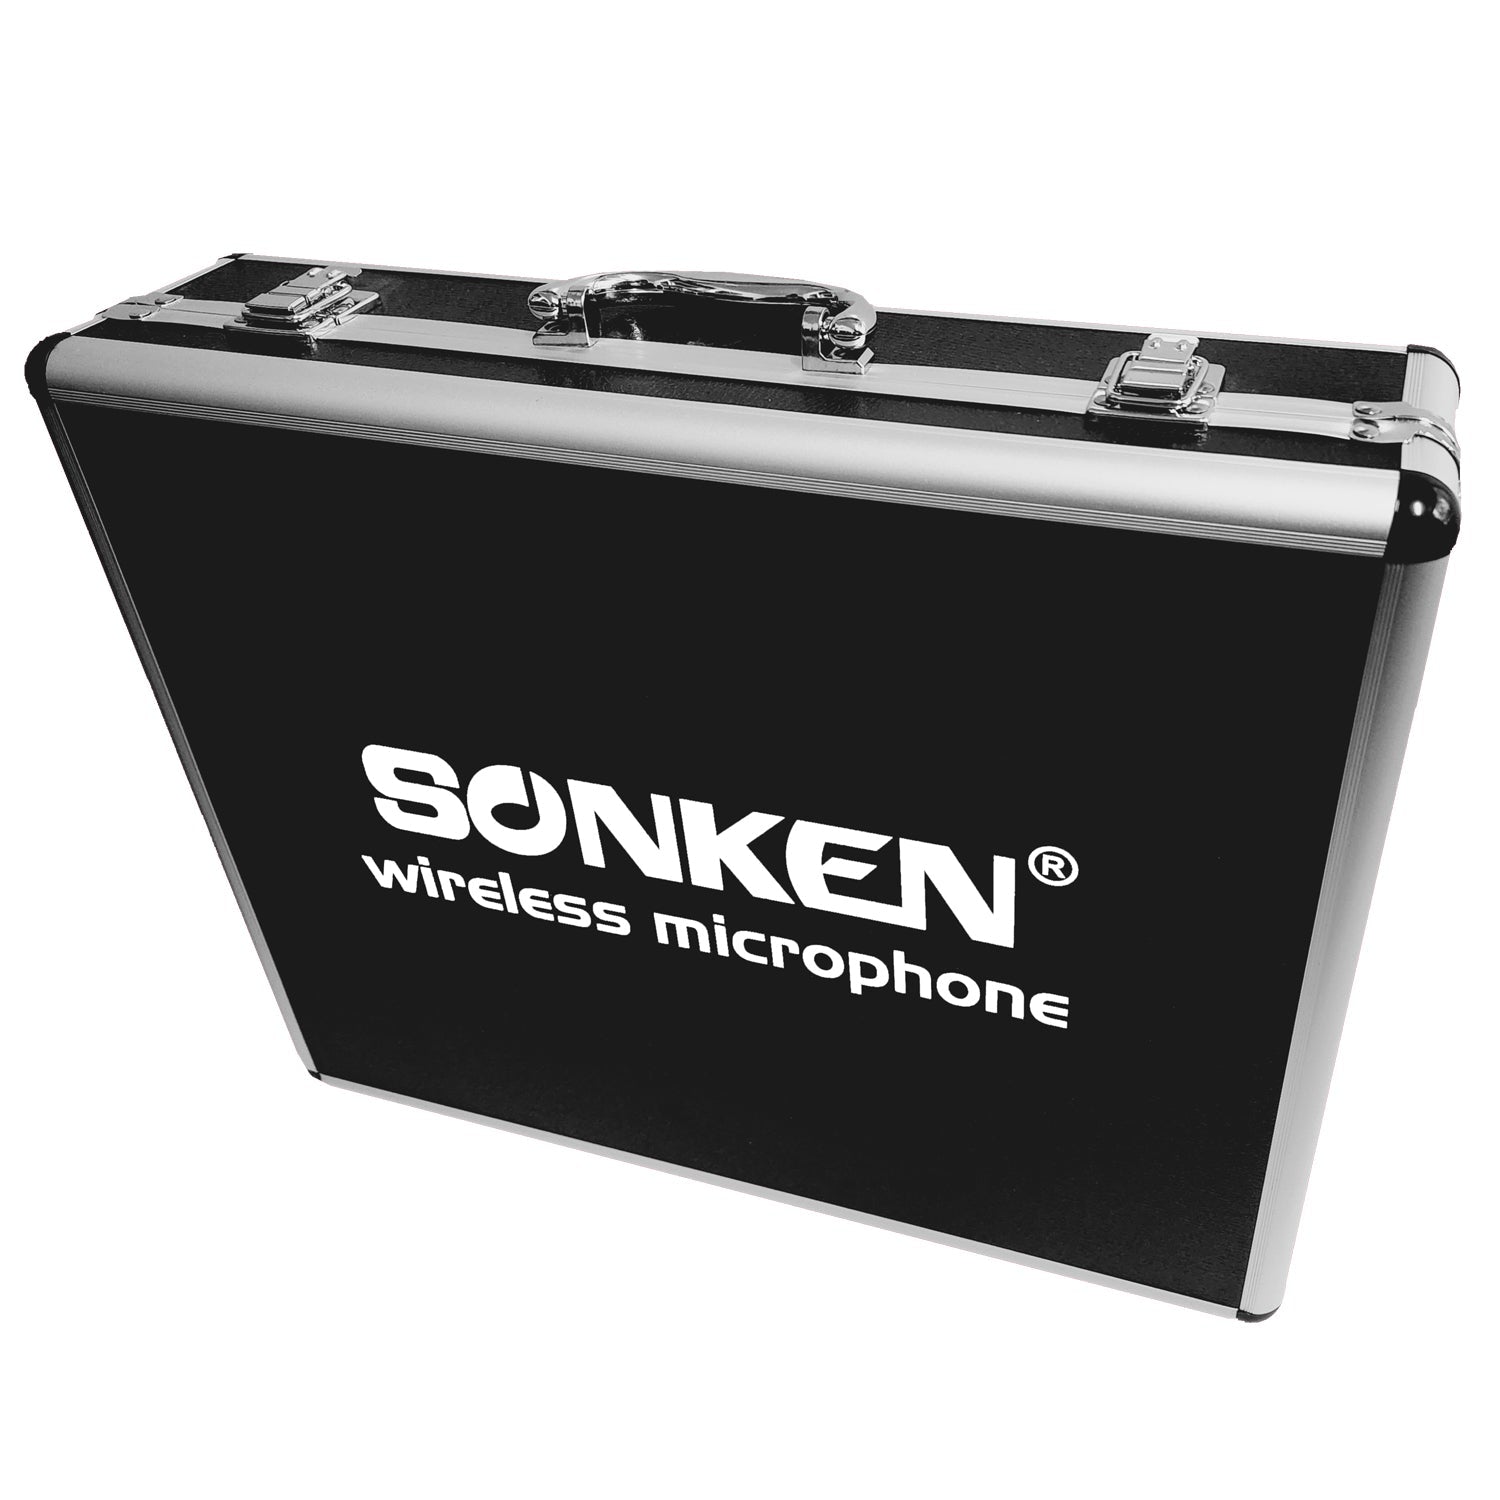 Sonken WM-800D (with Case) Pro UHF Wireless Microphones (2) and (2) Body Packs + Headsets with Receiver Unit - Karaoke Home Entertainment